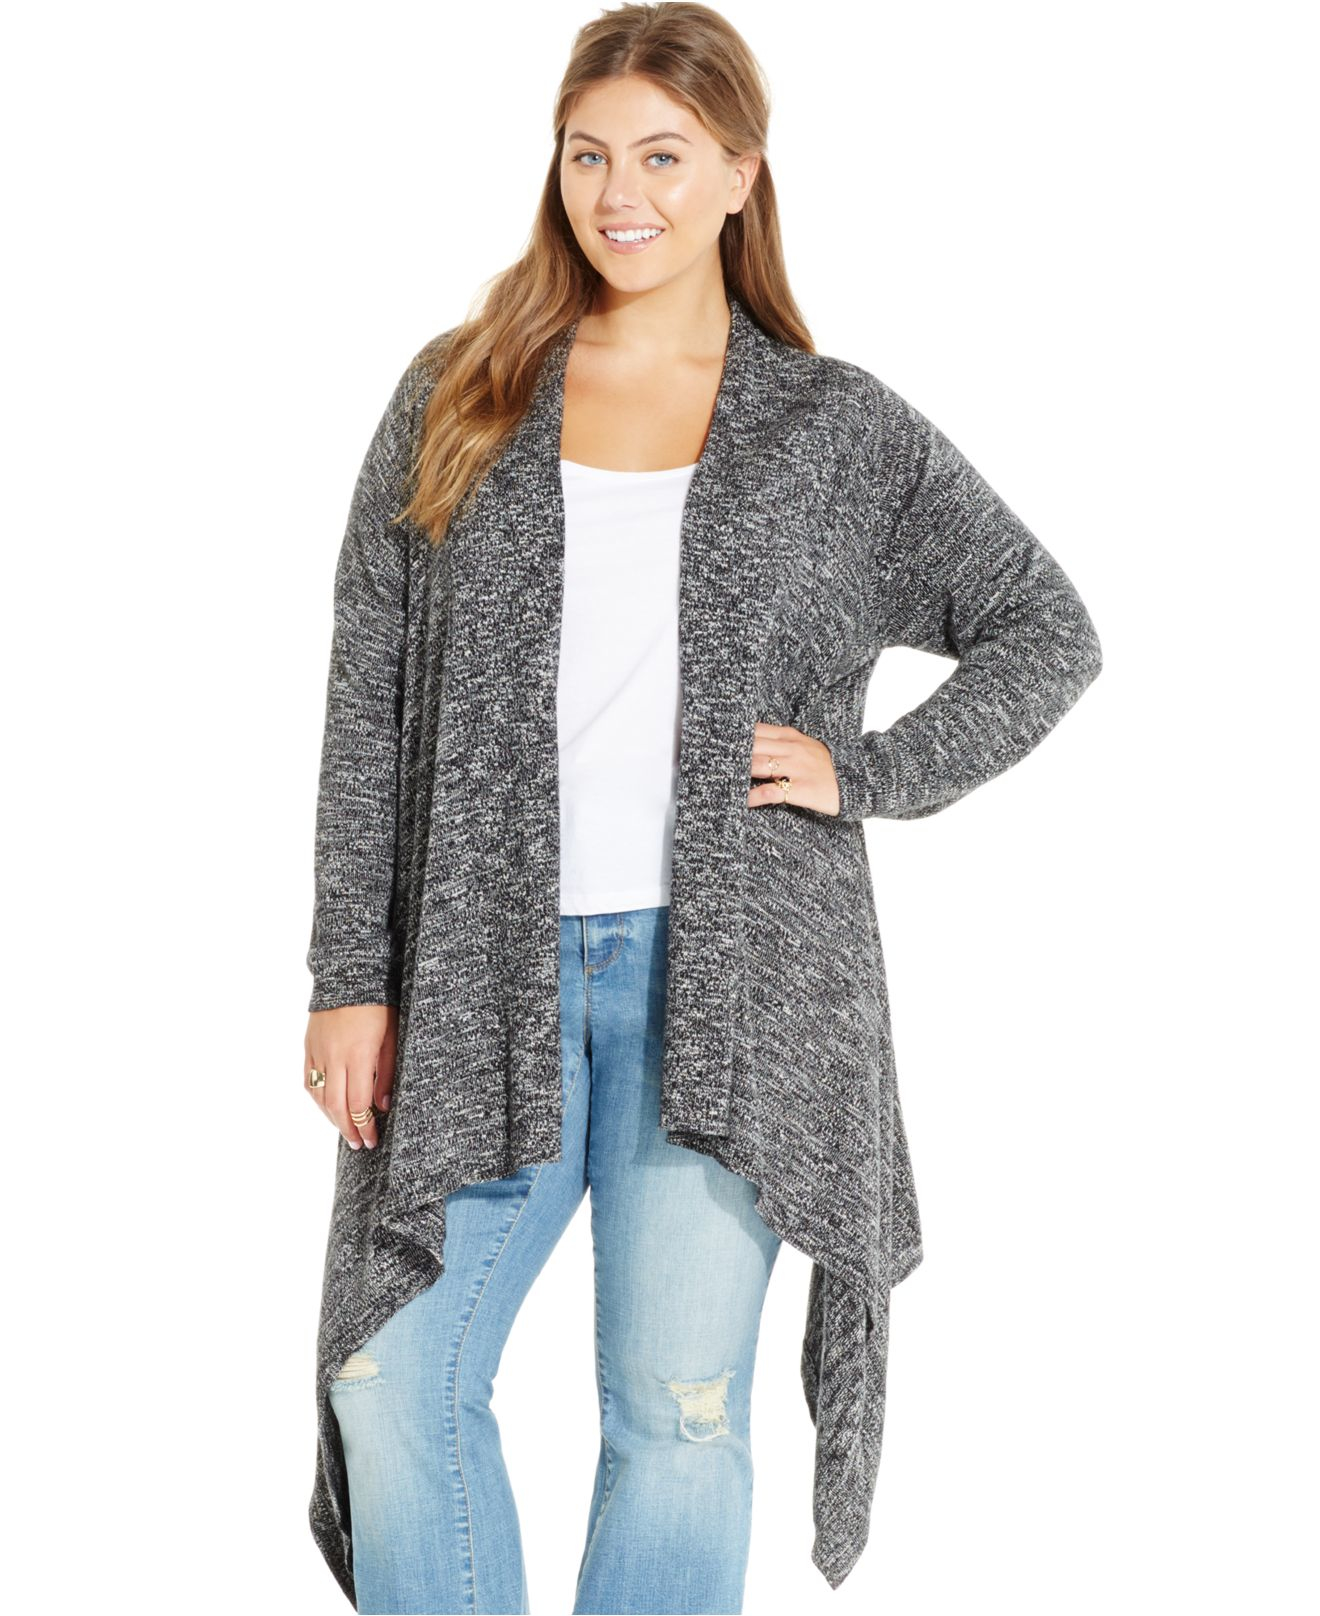 Lyst - Lucky Brand Lucky Brand Plus Size Draped Marled Cardigan in Black